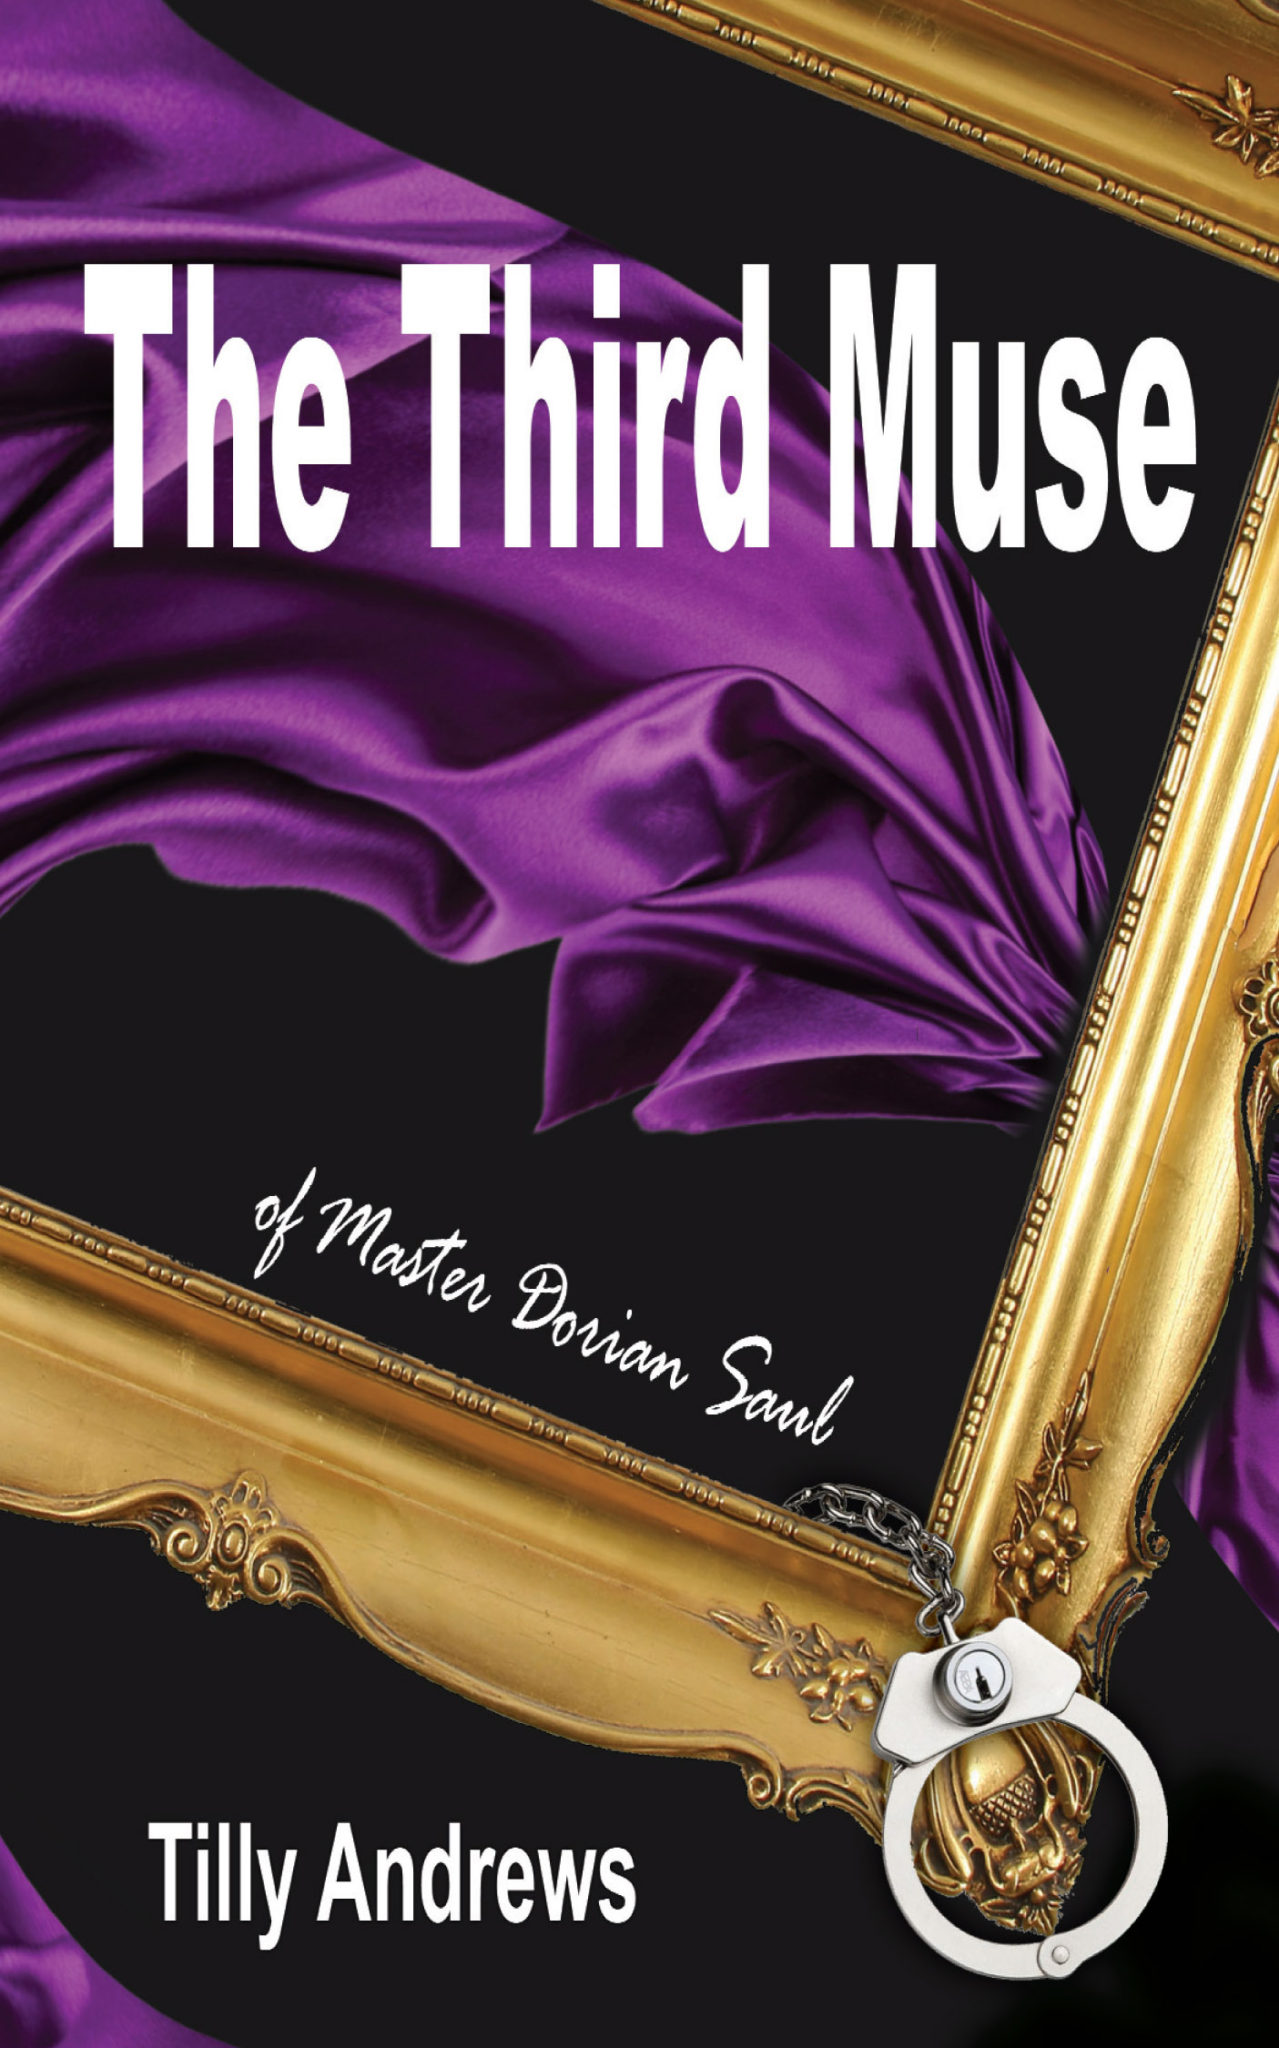 FREE: The Third Muse of Master Dorian Saul by Tilly Andrews